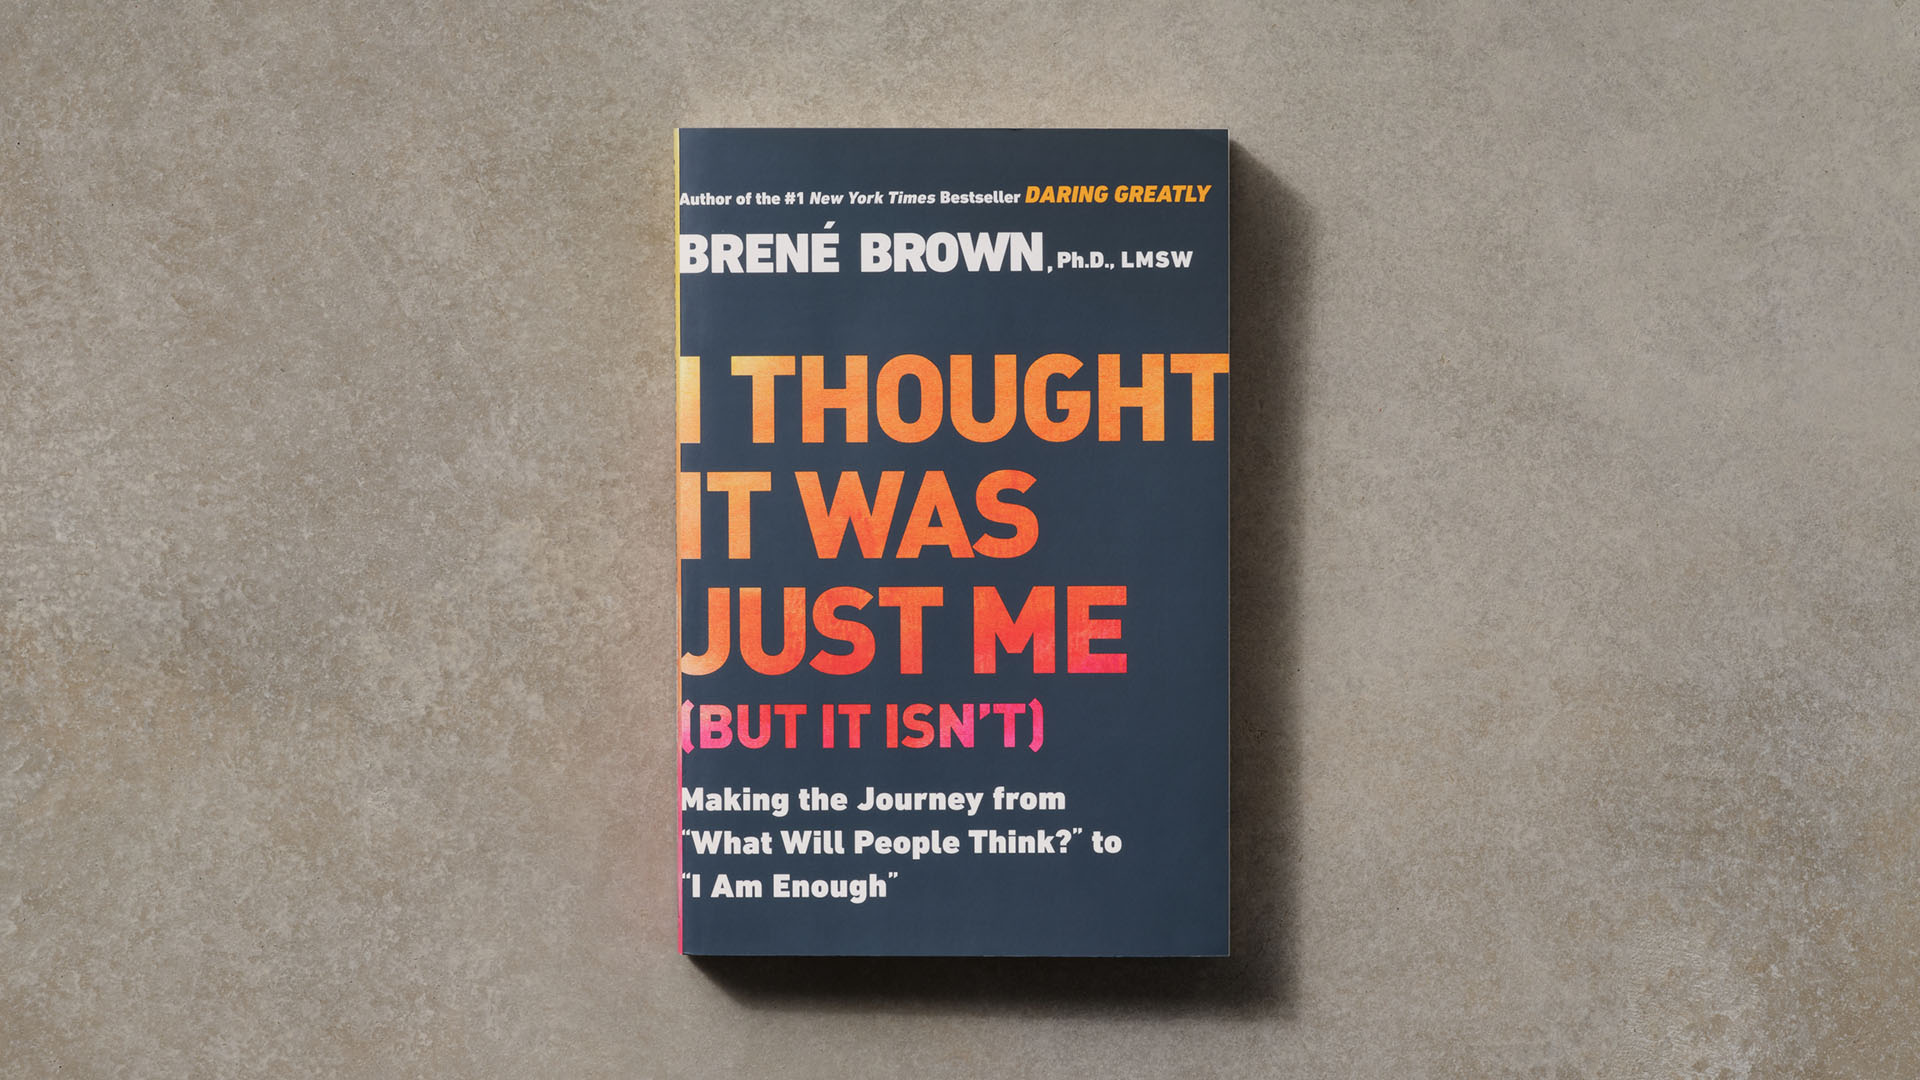 I Thought It Was Just Me (But It Isn't) - Brené Brown